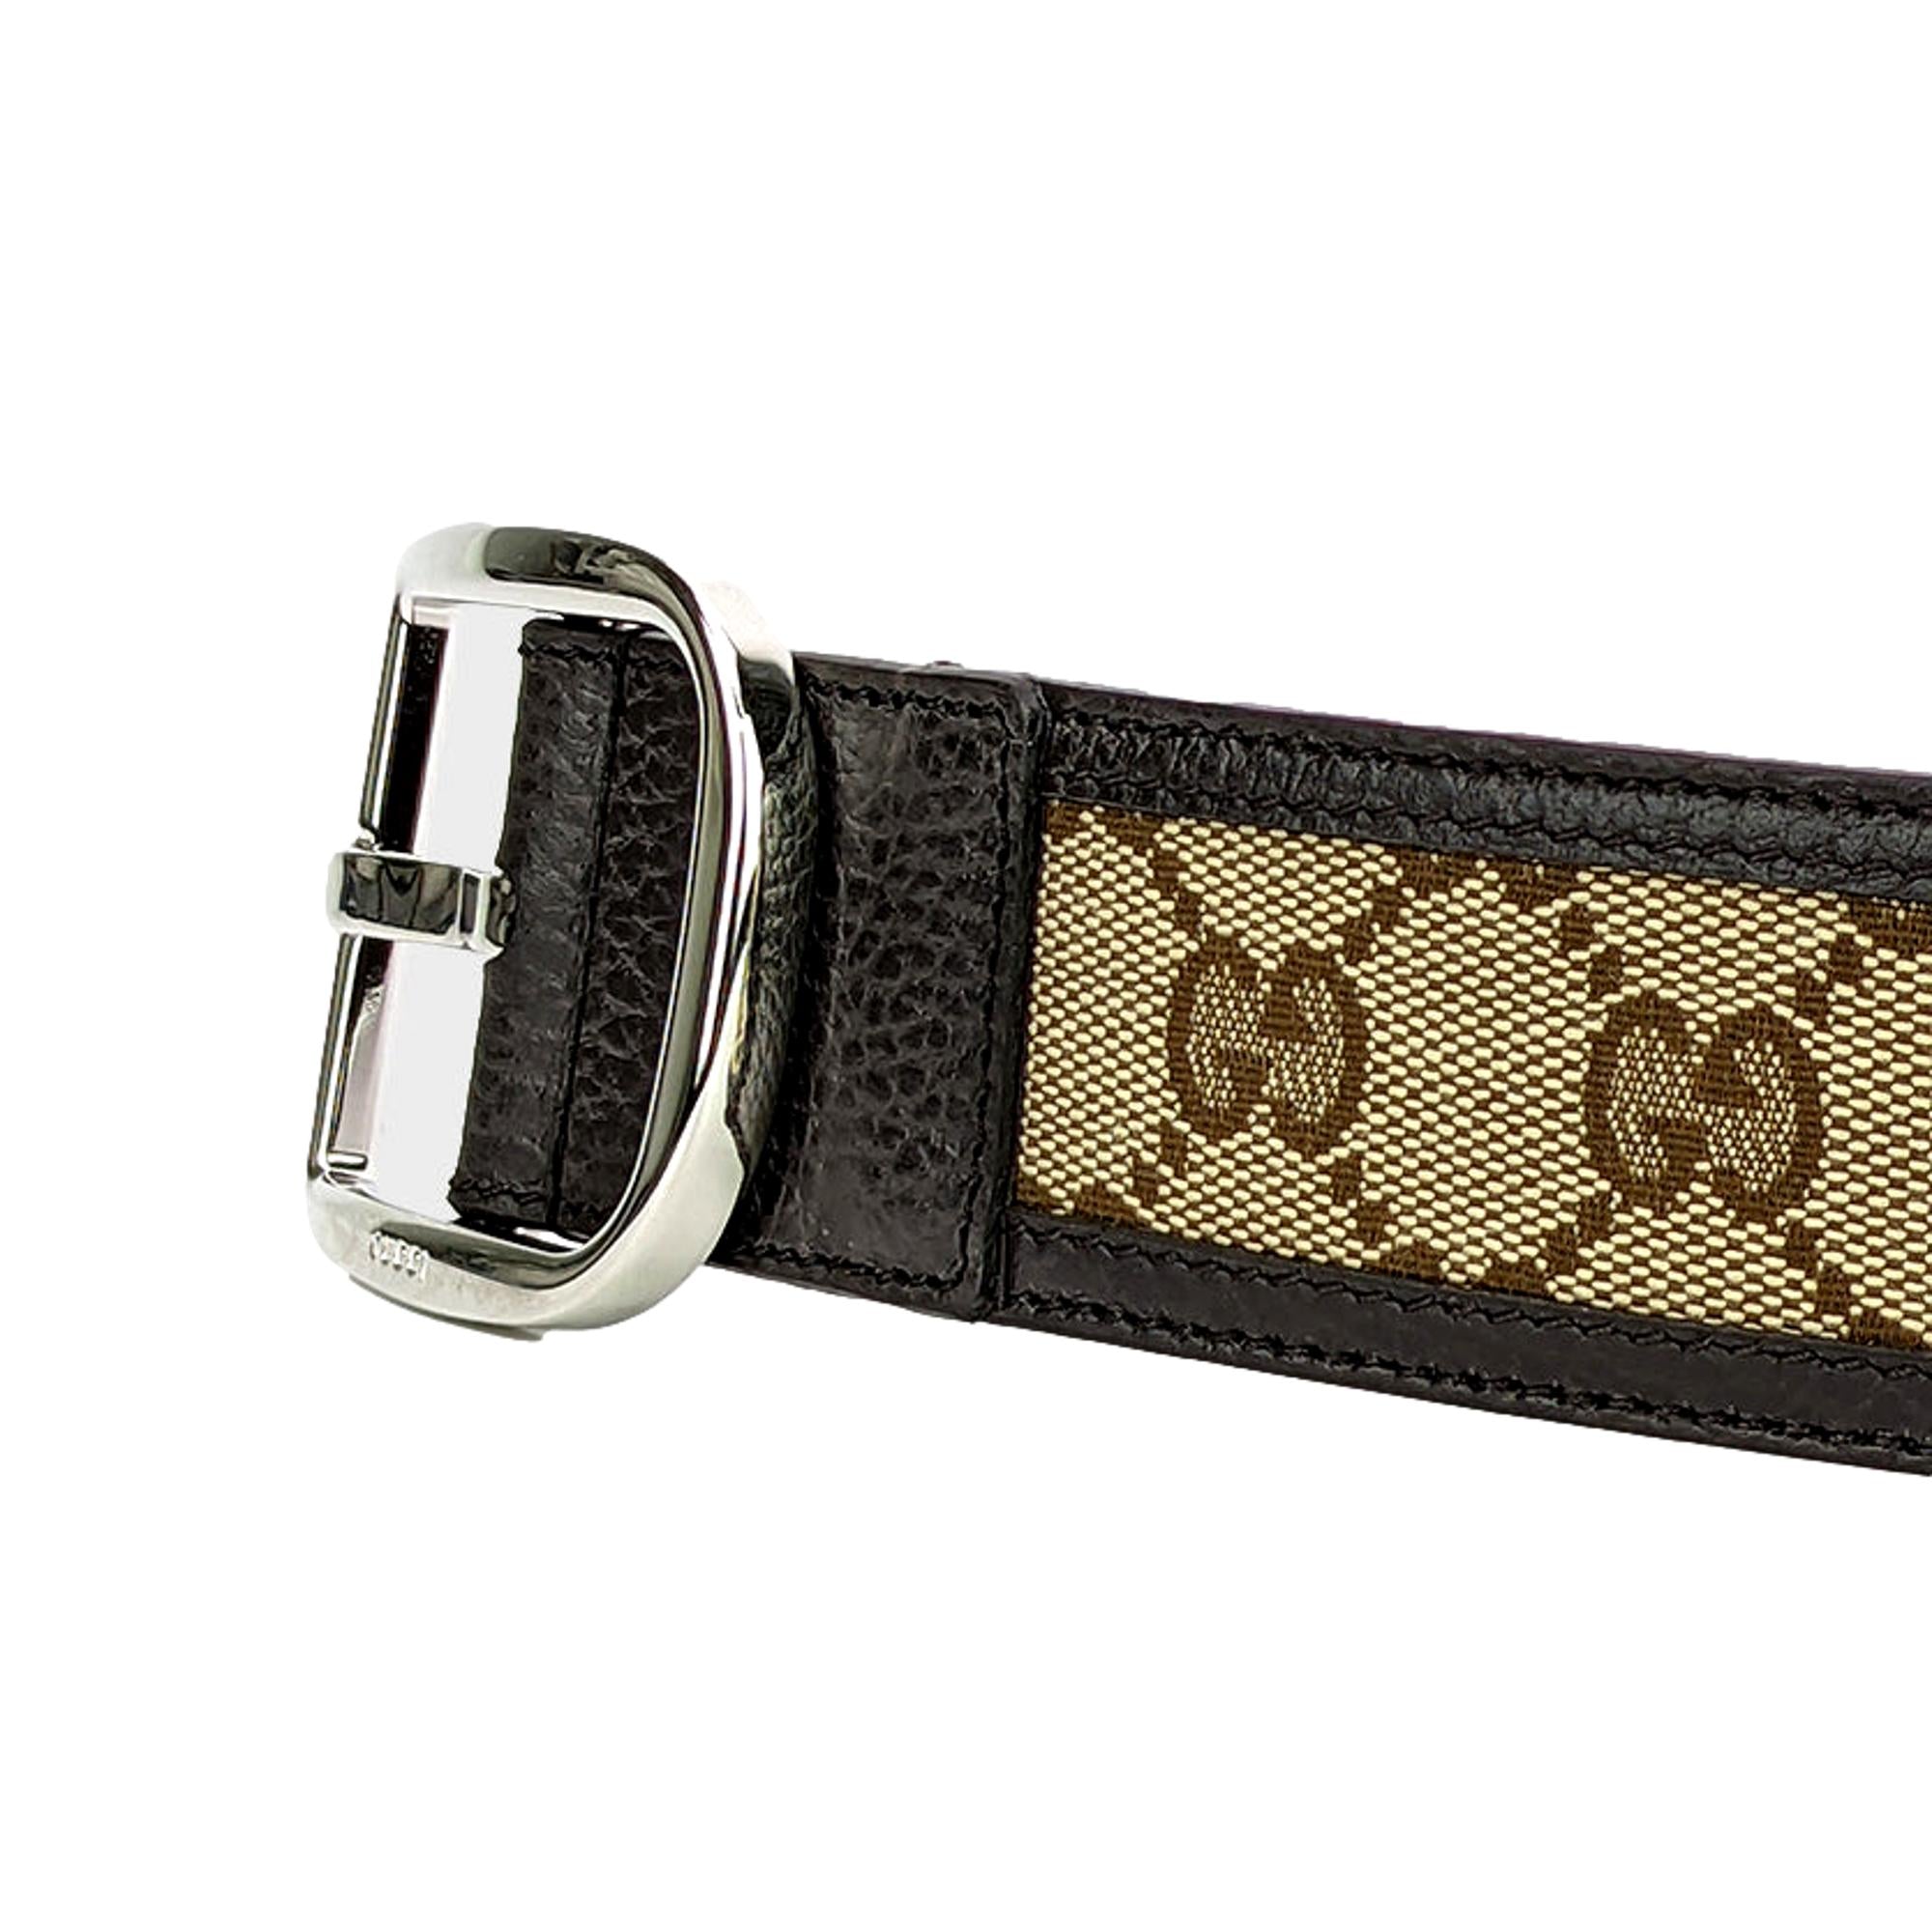 Gucci Guccisssima Brown and Beige Canvas Leather Trim Belt Size 100/40 at_Queen_Bee_of_Beverly_Hills